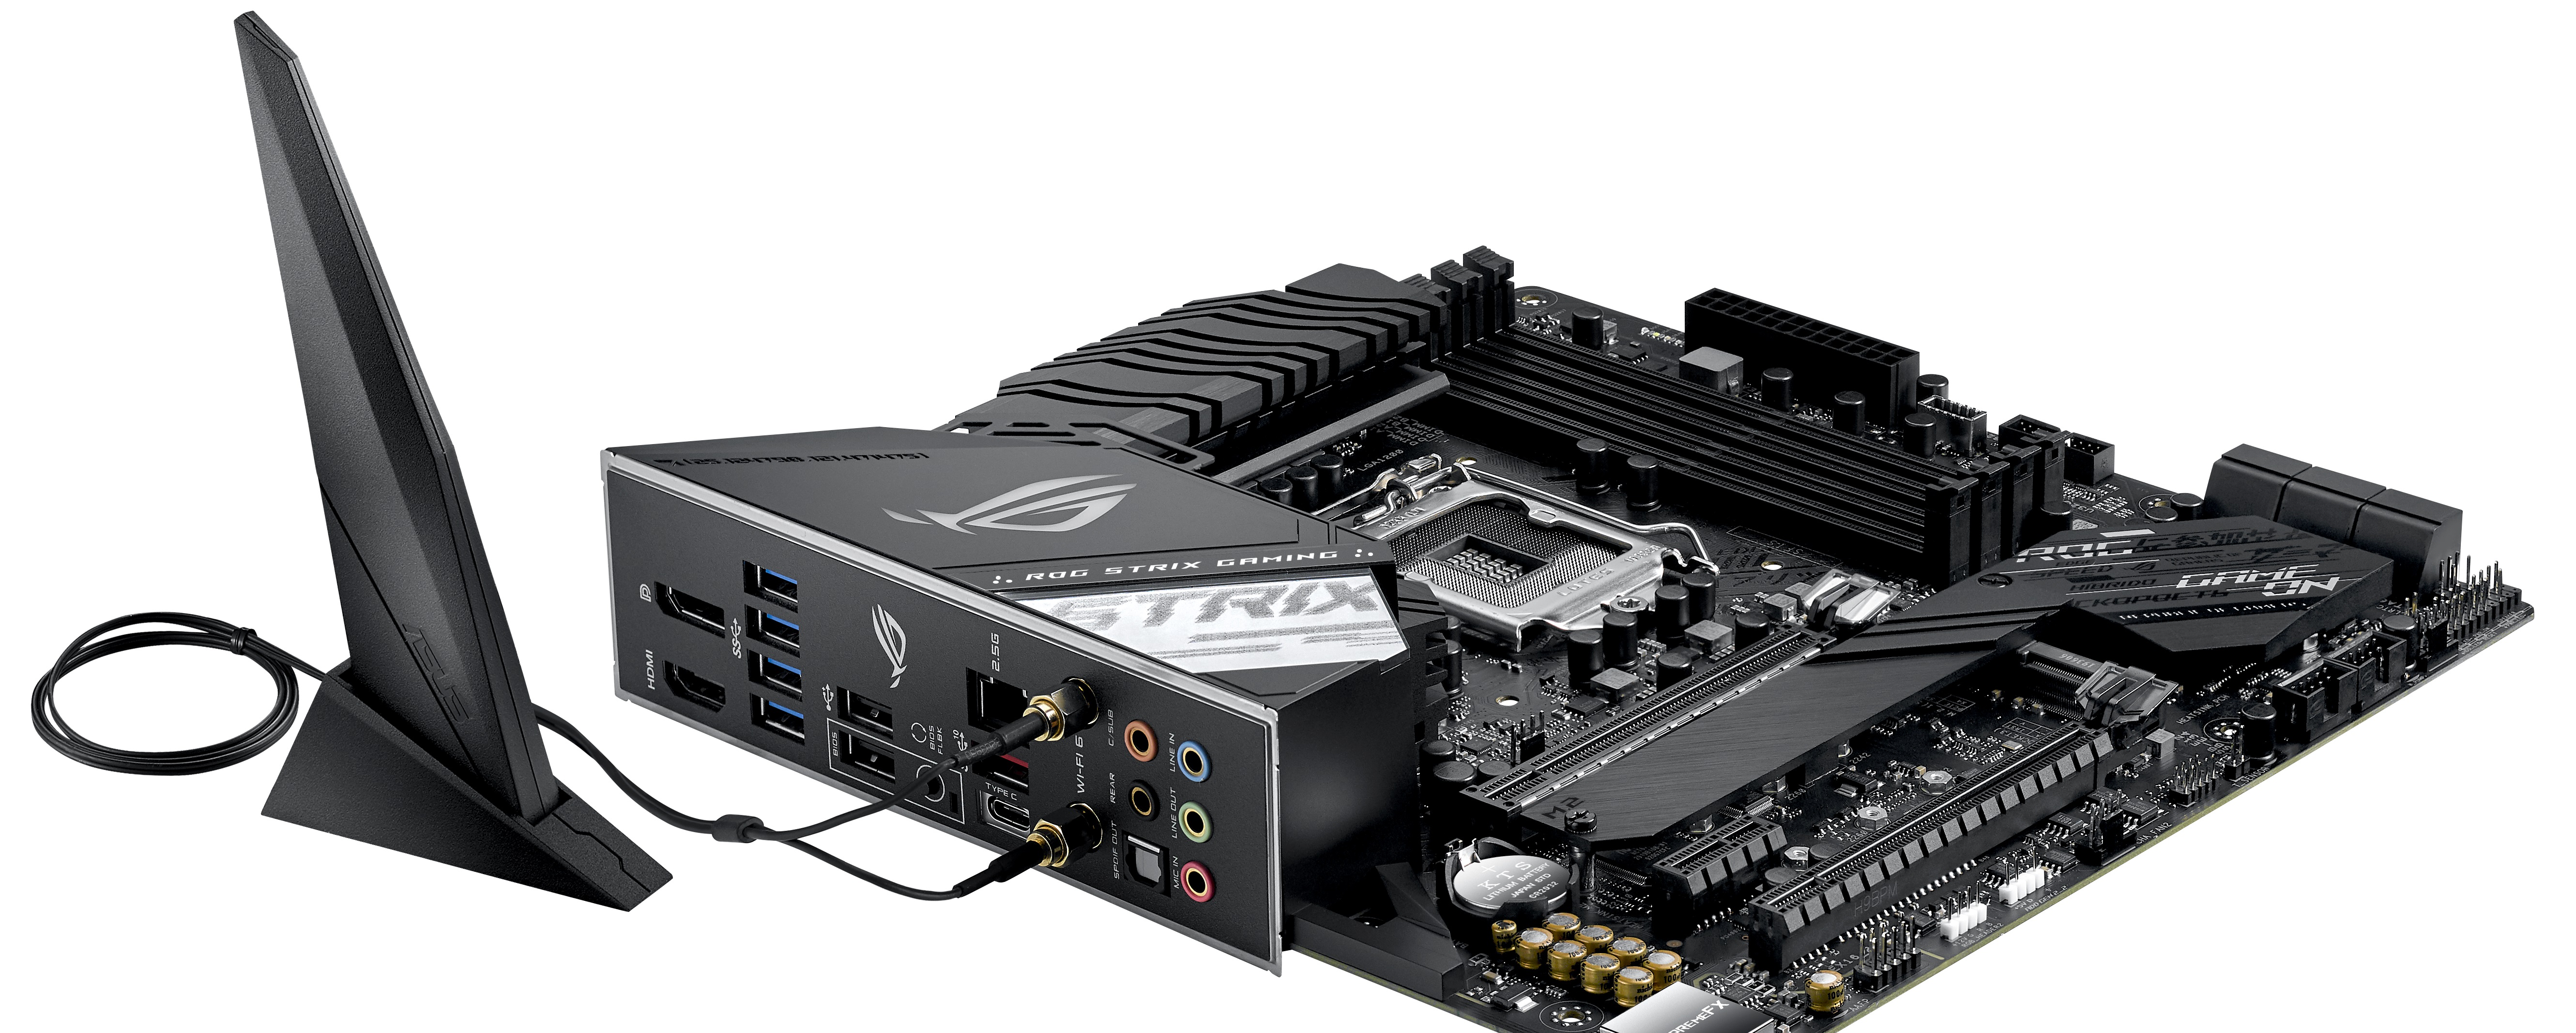 ASUS ROG Strix Z490-G Gaming Wi-Fi - The Intel Z490 Overview: 44+